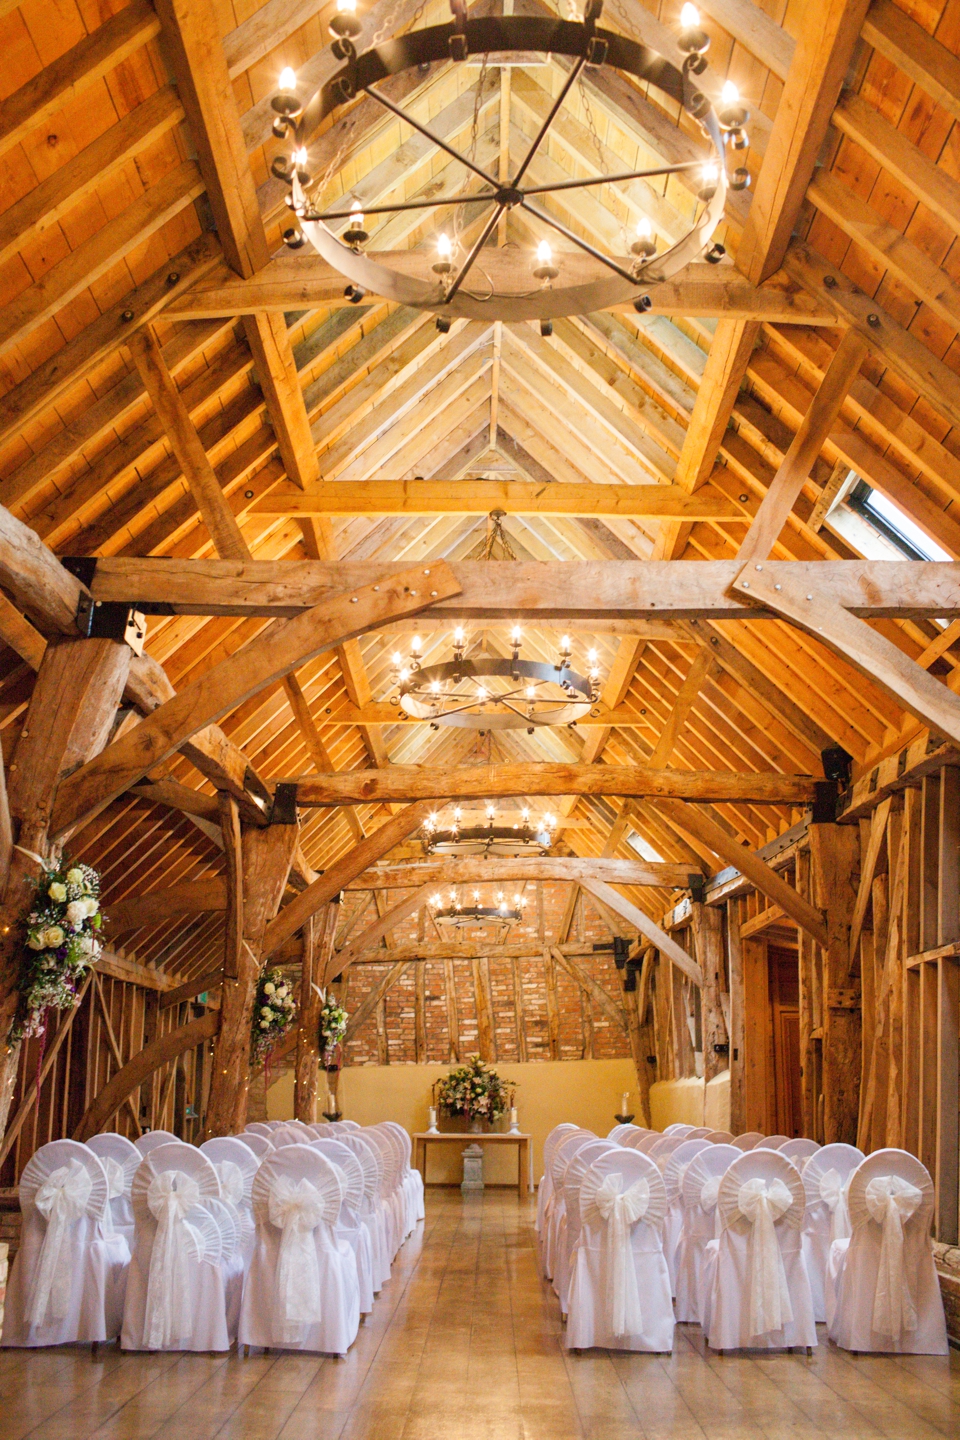 Bassmead Manor Barns - a beautiful country house wedding venue by Cambridge